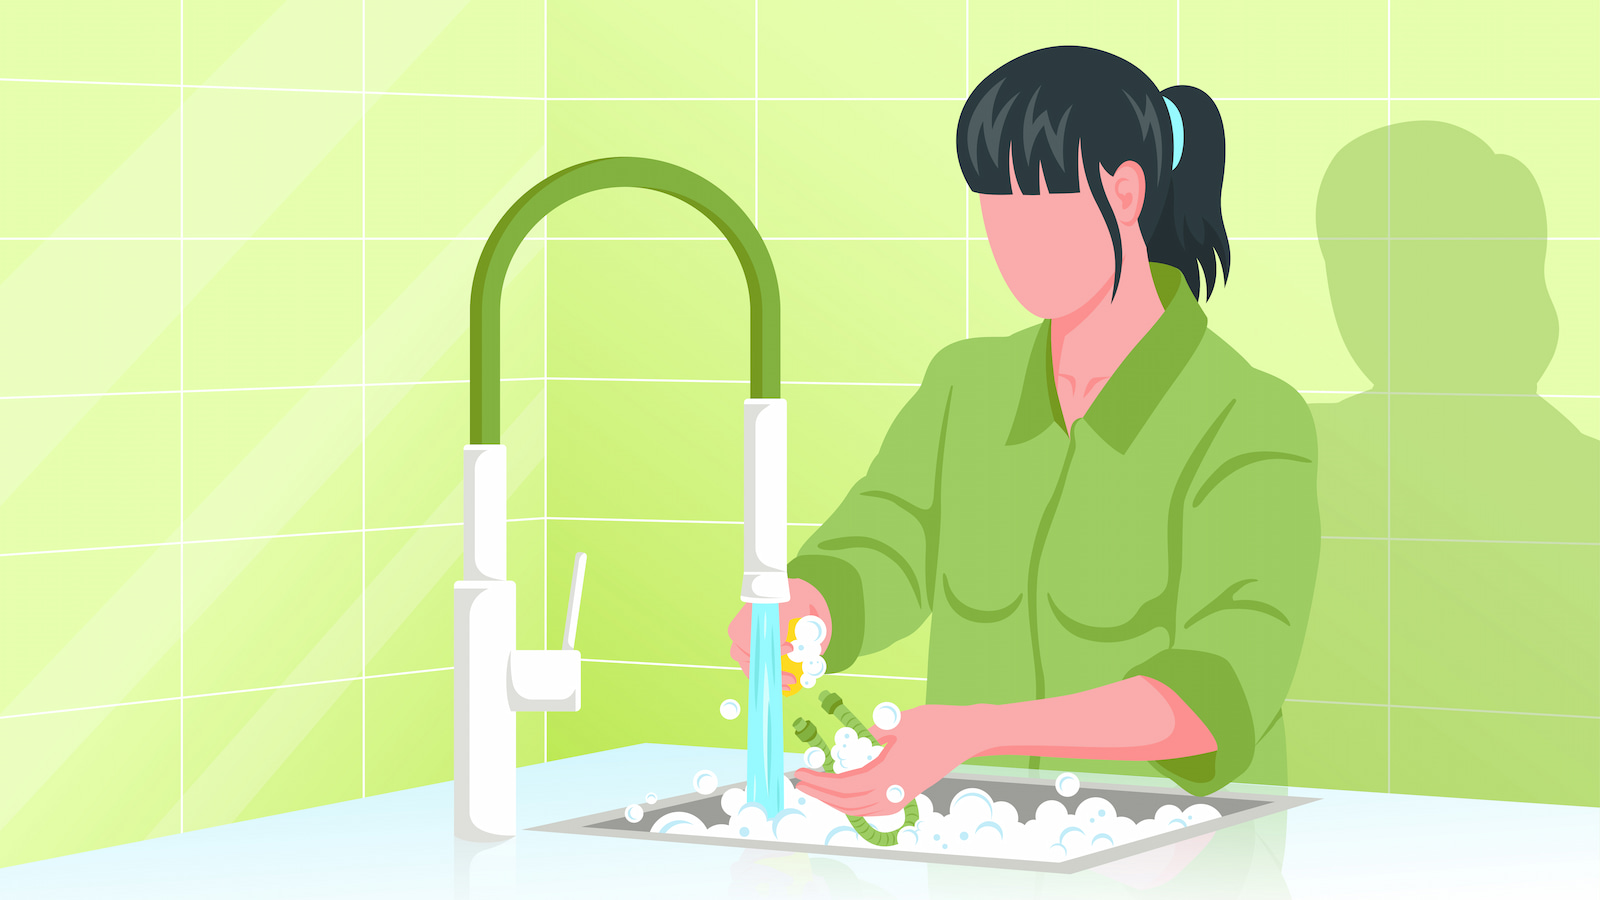 A woman practicing CPAP machine cleaning and maintenance by washing her hands in a sink.